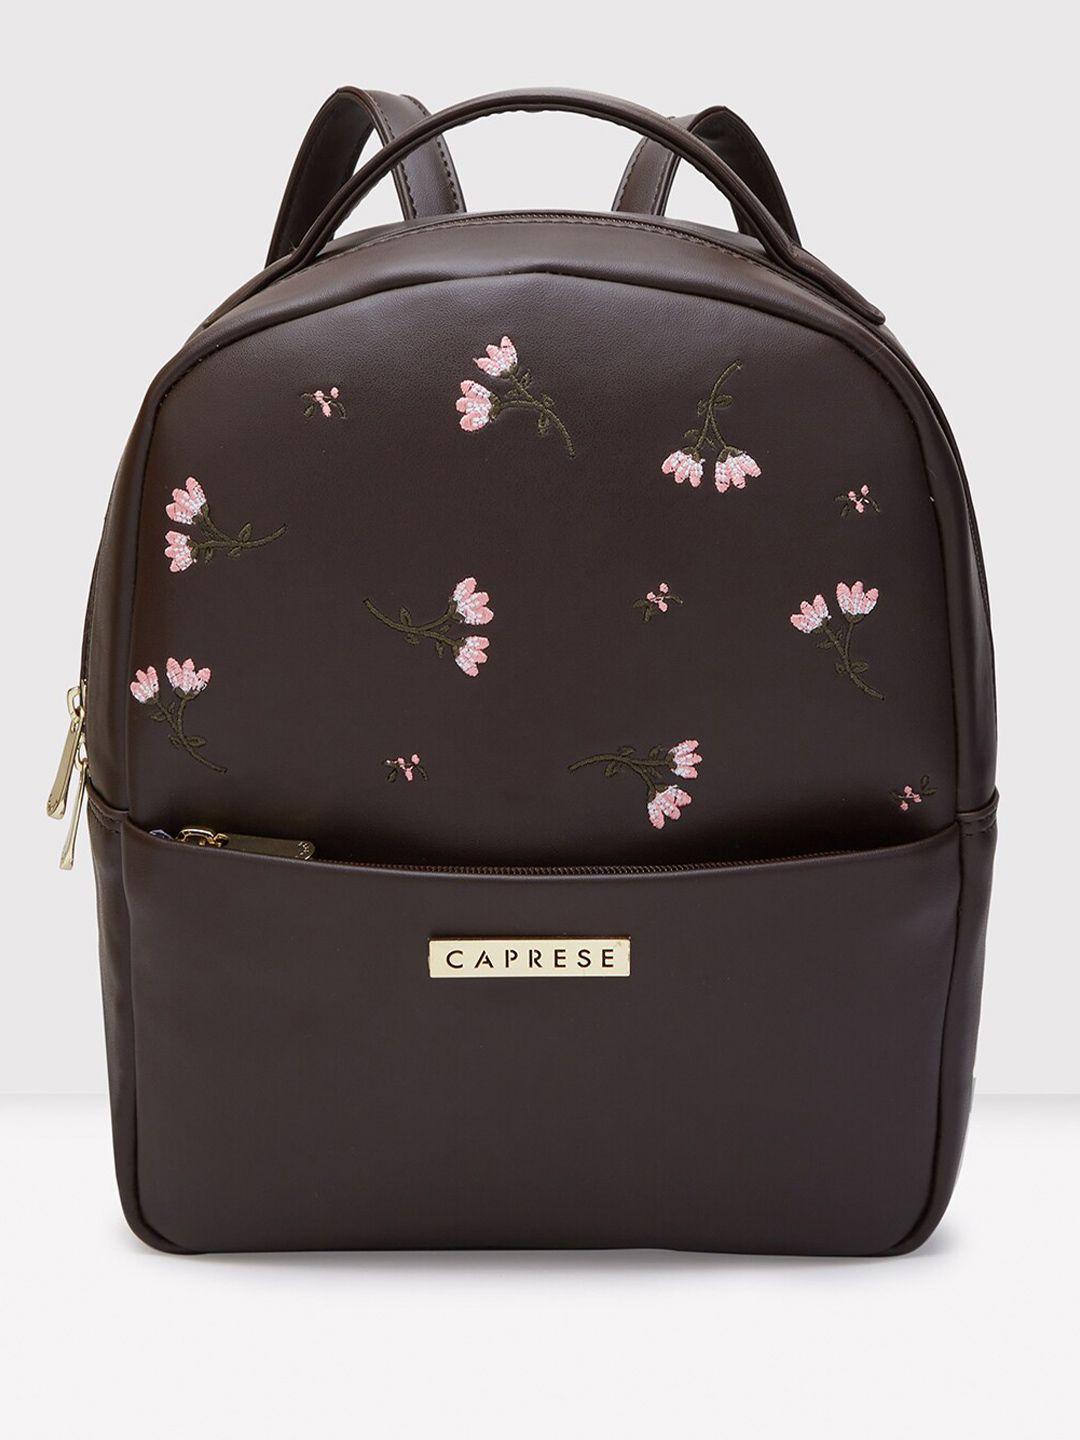 caprese embroiderad leather backpack